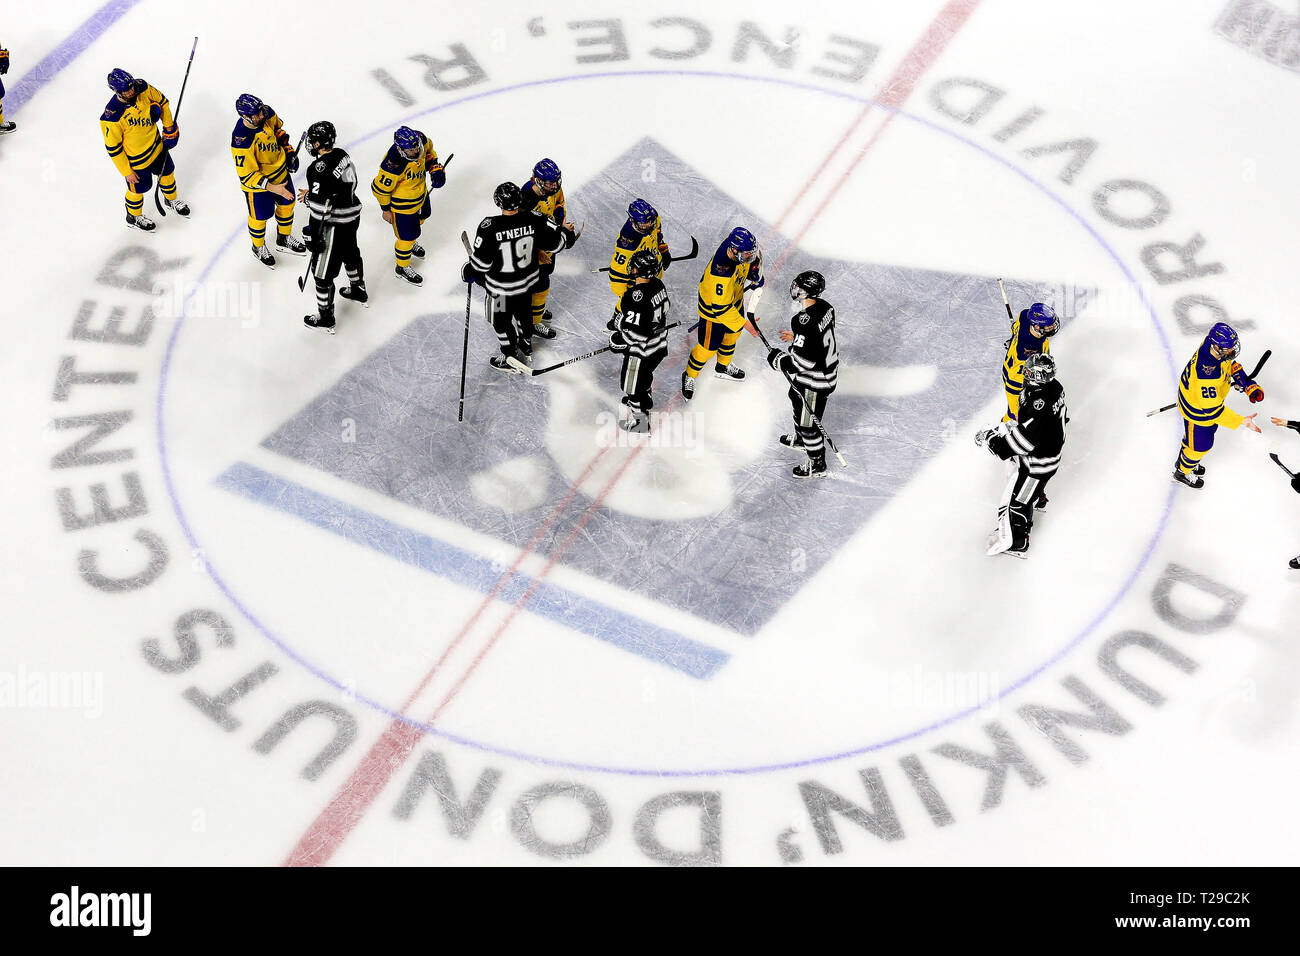 Providence,  USA. 30th Mar, 2019. The two teams shake hands after the NCAA East Regional hockey game between Minnesota State Mavericks and the Providence College Friars at The Dunkin Donuts Center in Providence, RI. Alan Sullivan/CSM/Alamy Live News Stock Photo